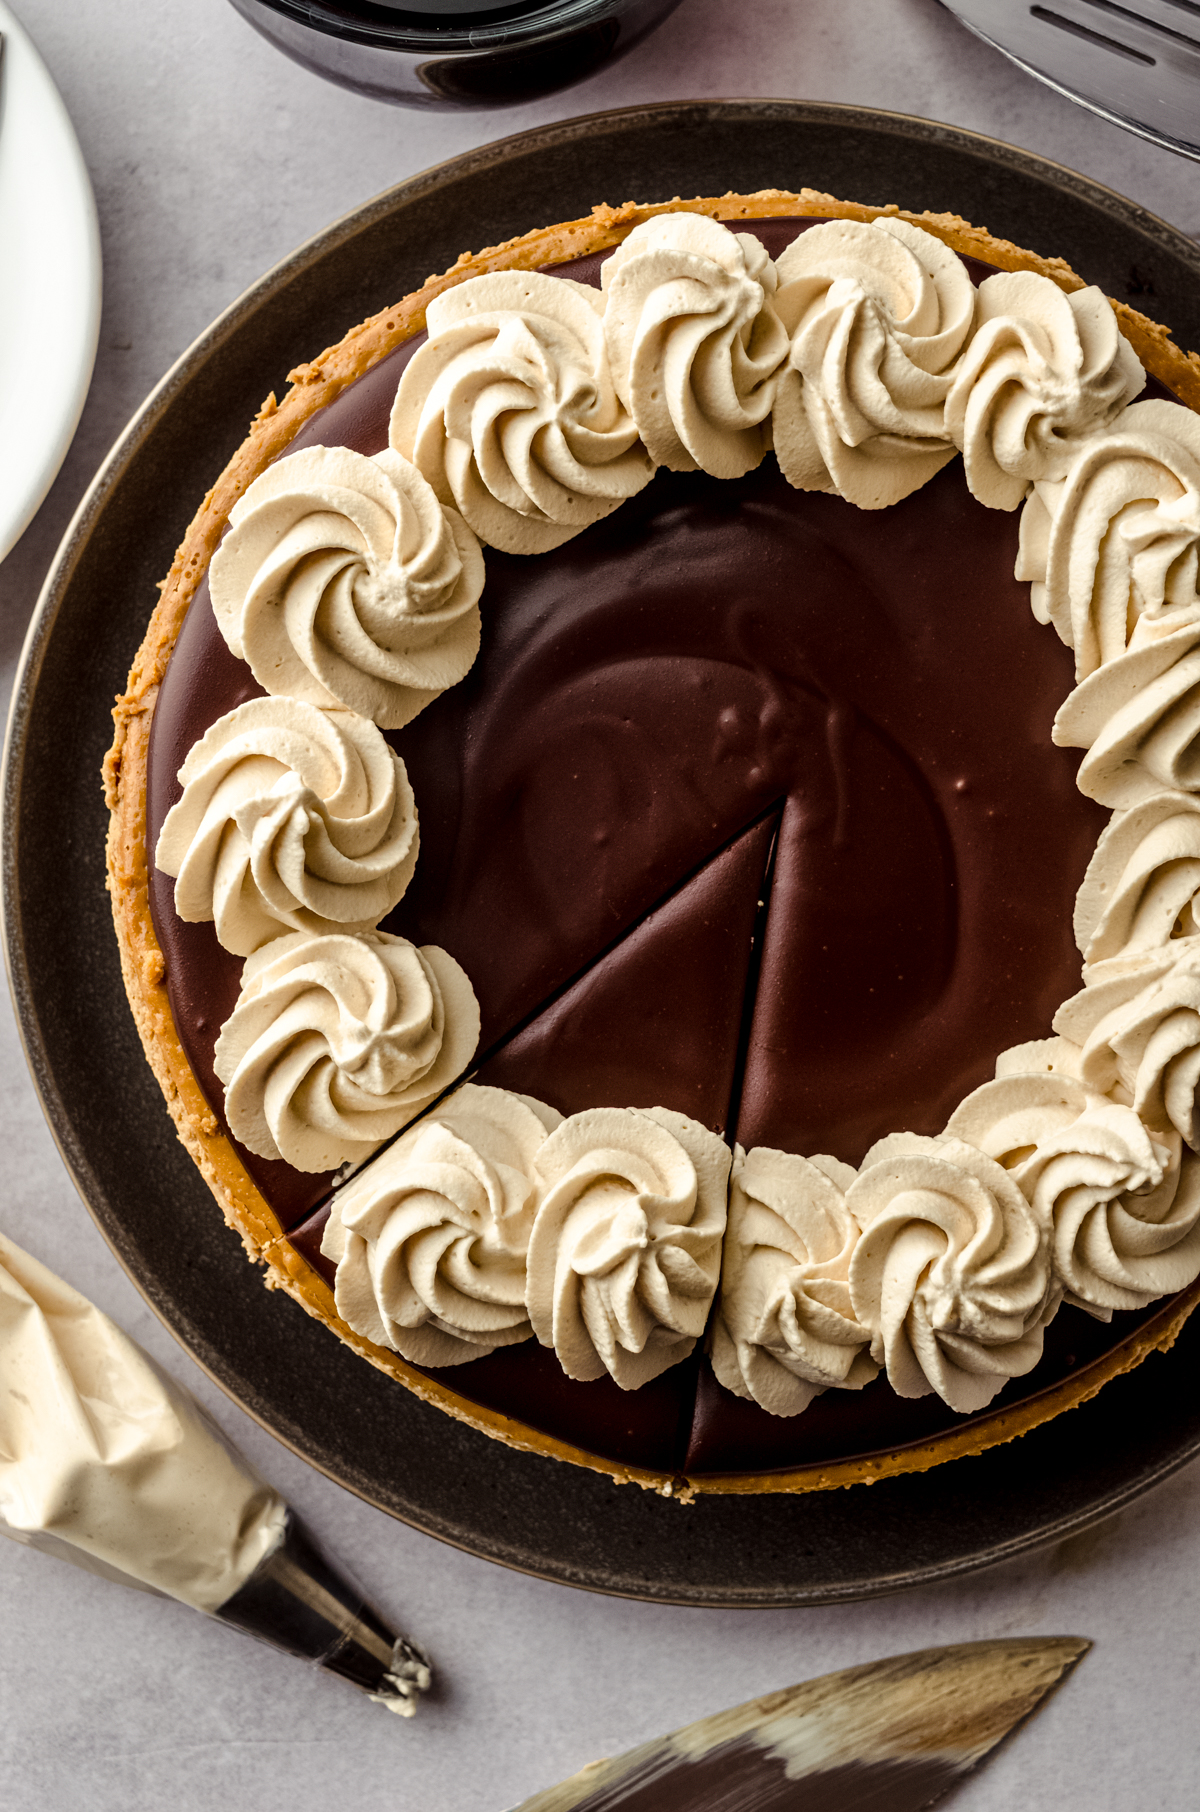 A coffee cheesecake with ganache and coffee whipped cream on top of it.